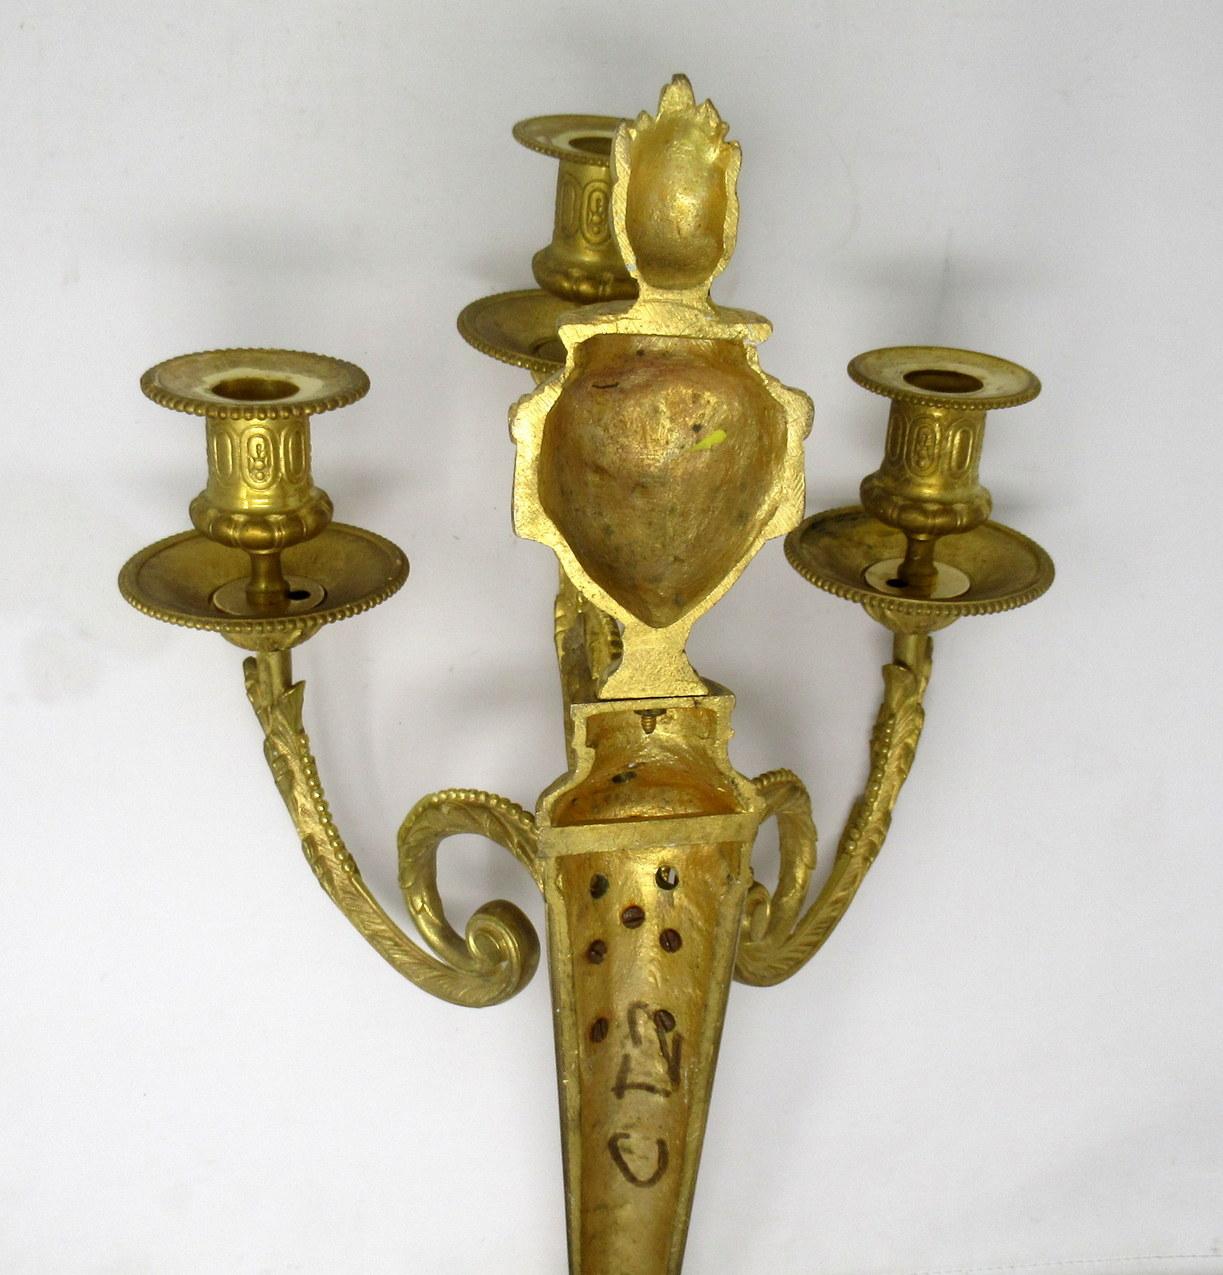 Ormolu Antique Pair of French Gilt Bronze Three-Light Wall Candle Sconces, 19th Century